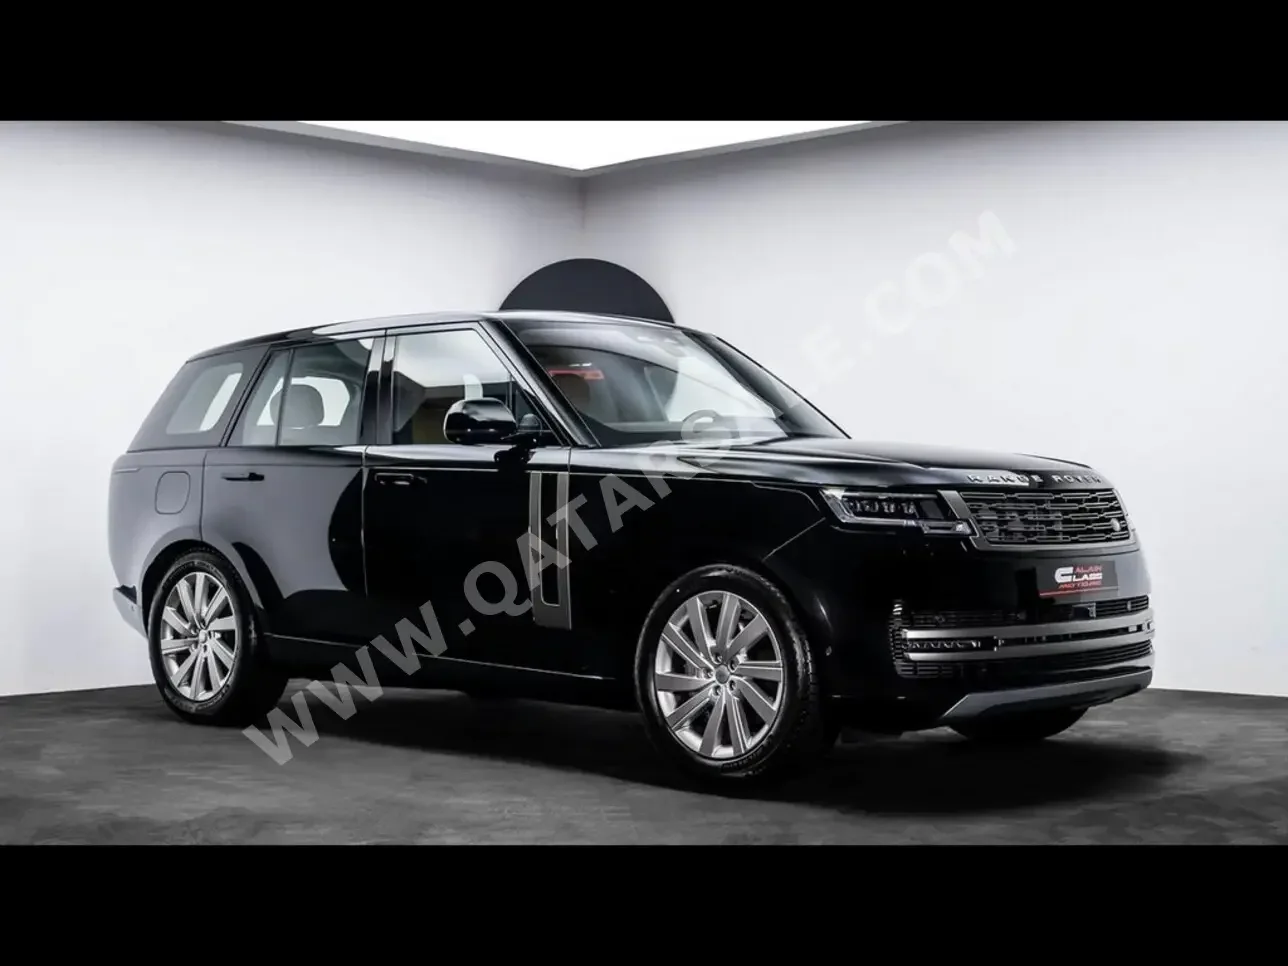 Land Rover  Range Rover  Vogue SE  2023  Automatic  0 Km  8 Cylinder  Four Wheel Drive (4WD)  SUV  Black